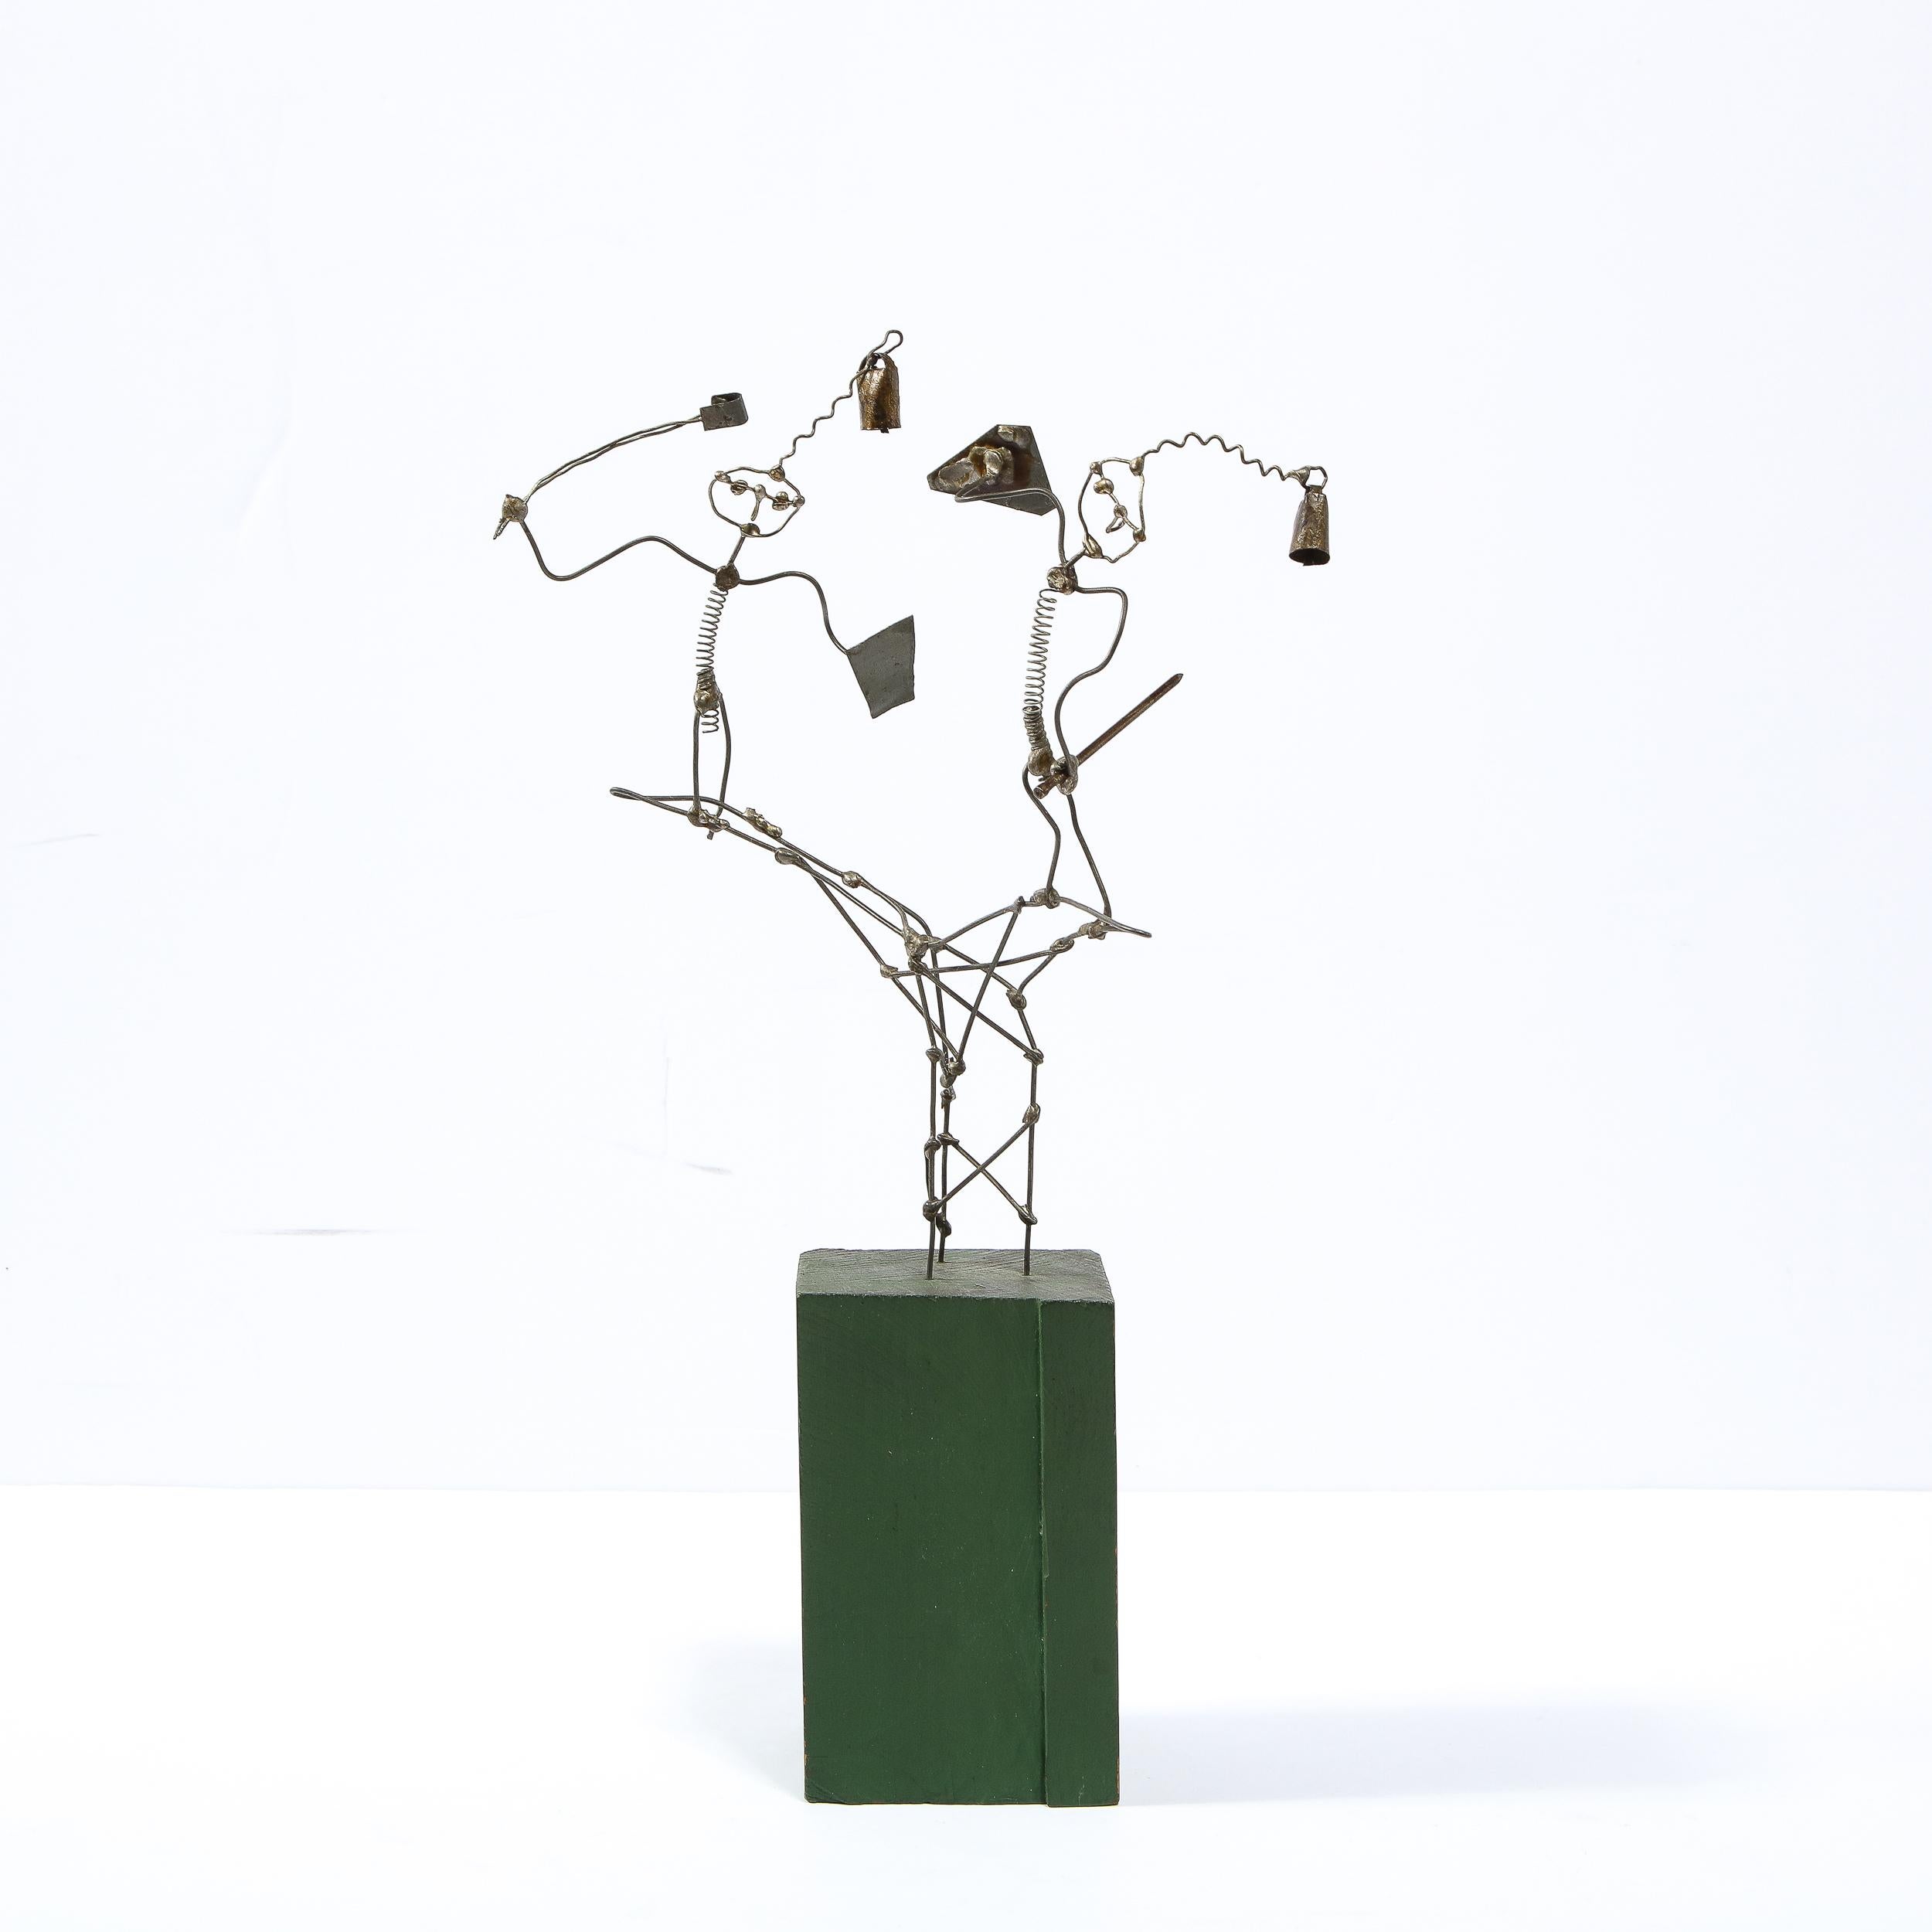 Painted Wood & Welded Metal Kinetic Figurative Sculpture by William Accorsi 2